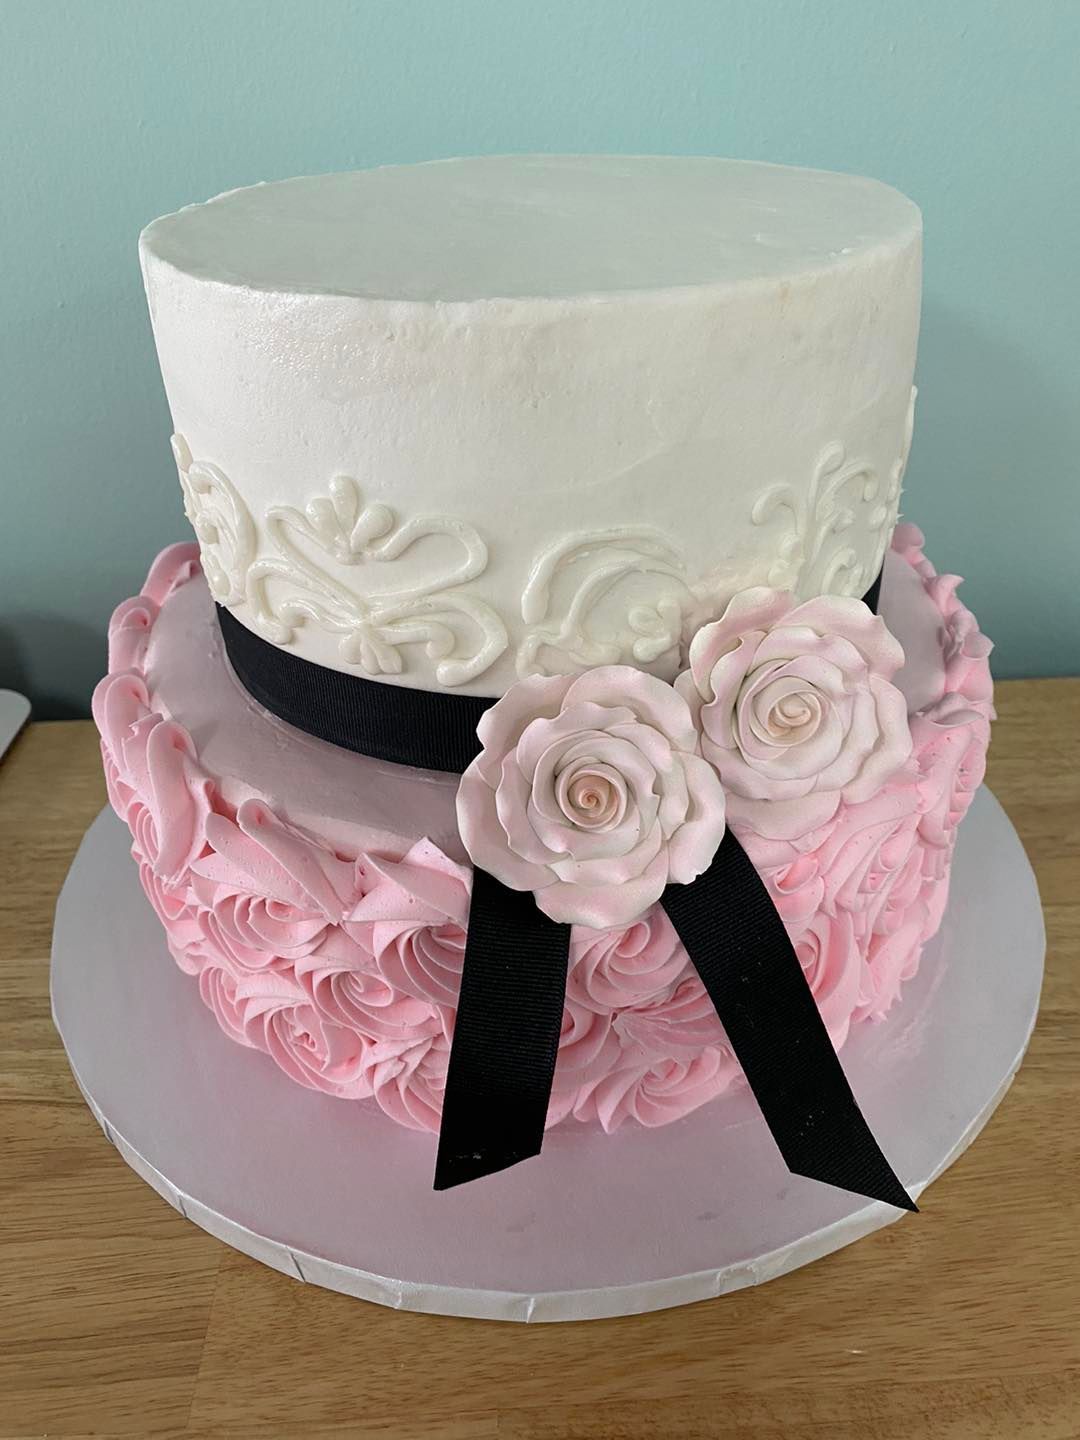 Wedding cake with swirled icing roses in white and pink, dusted with edible glitter